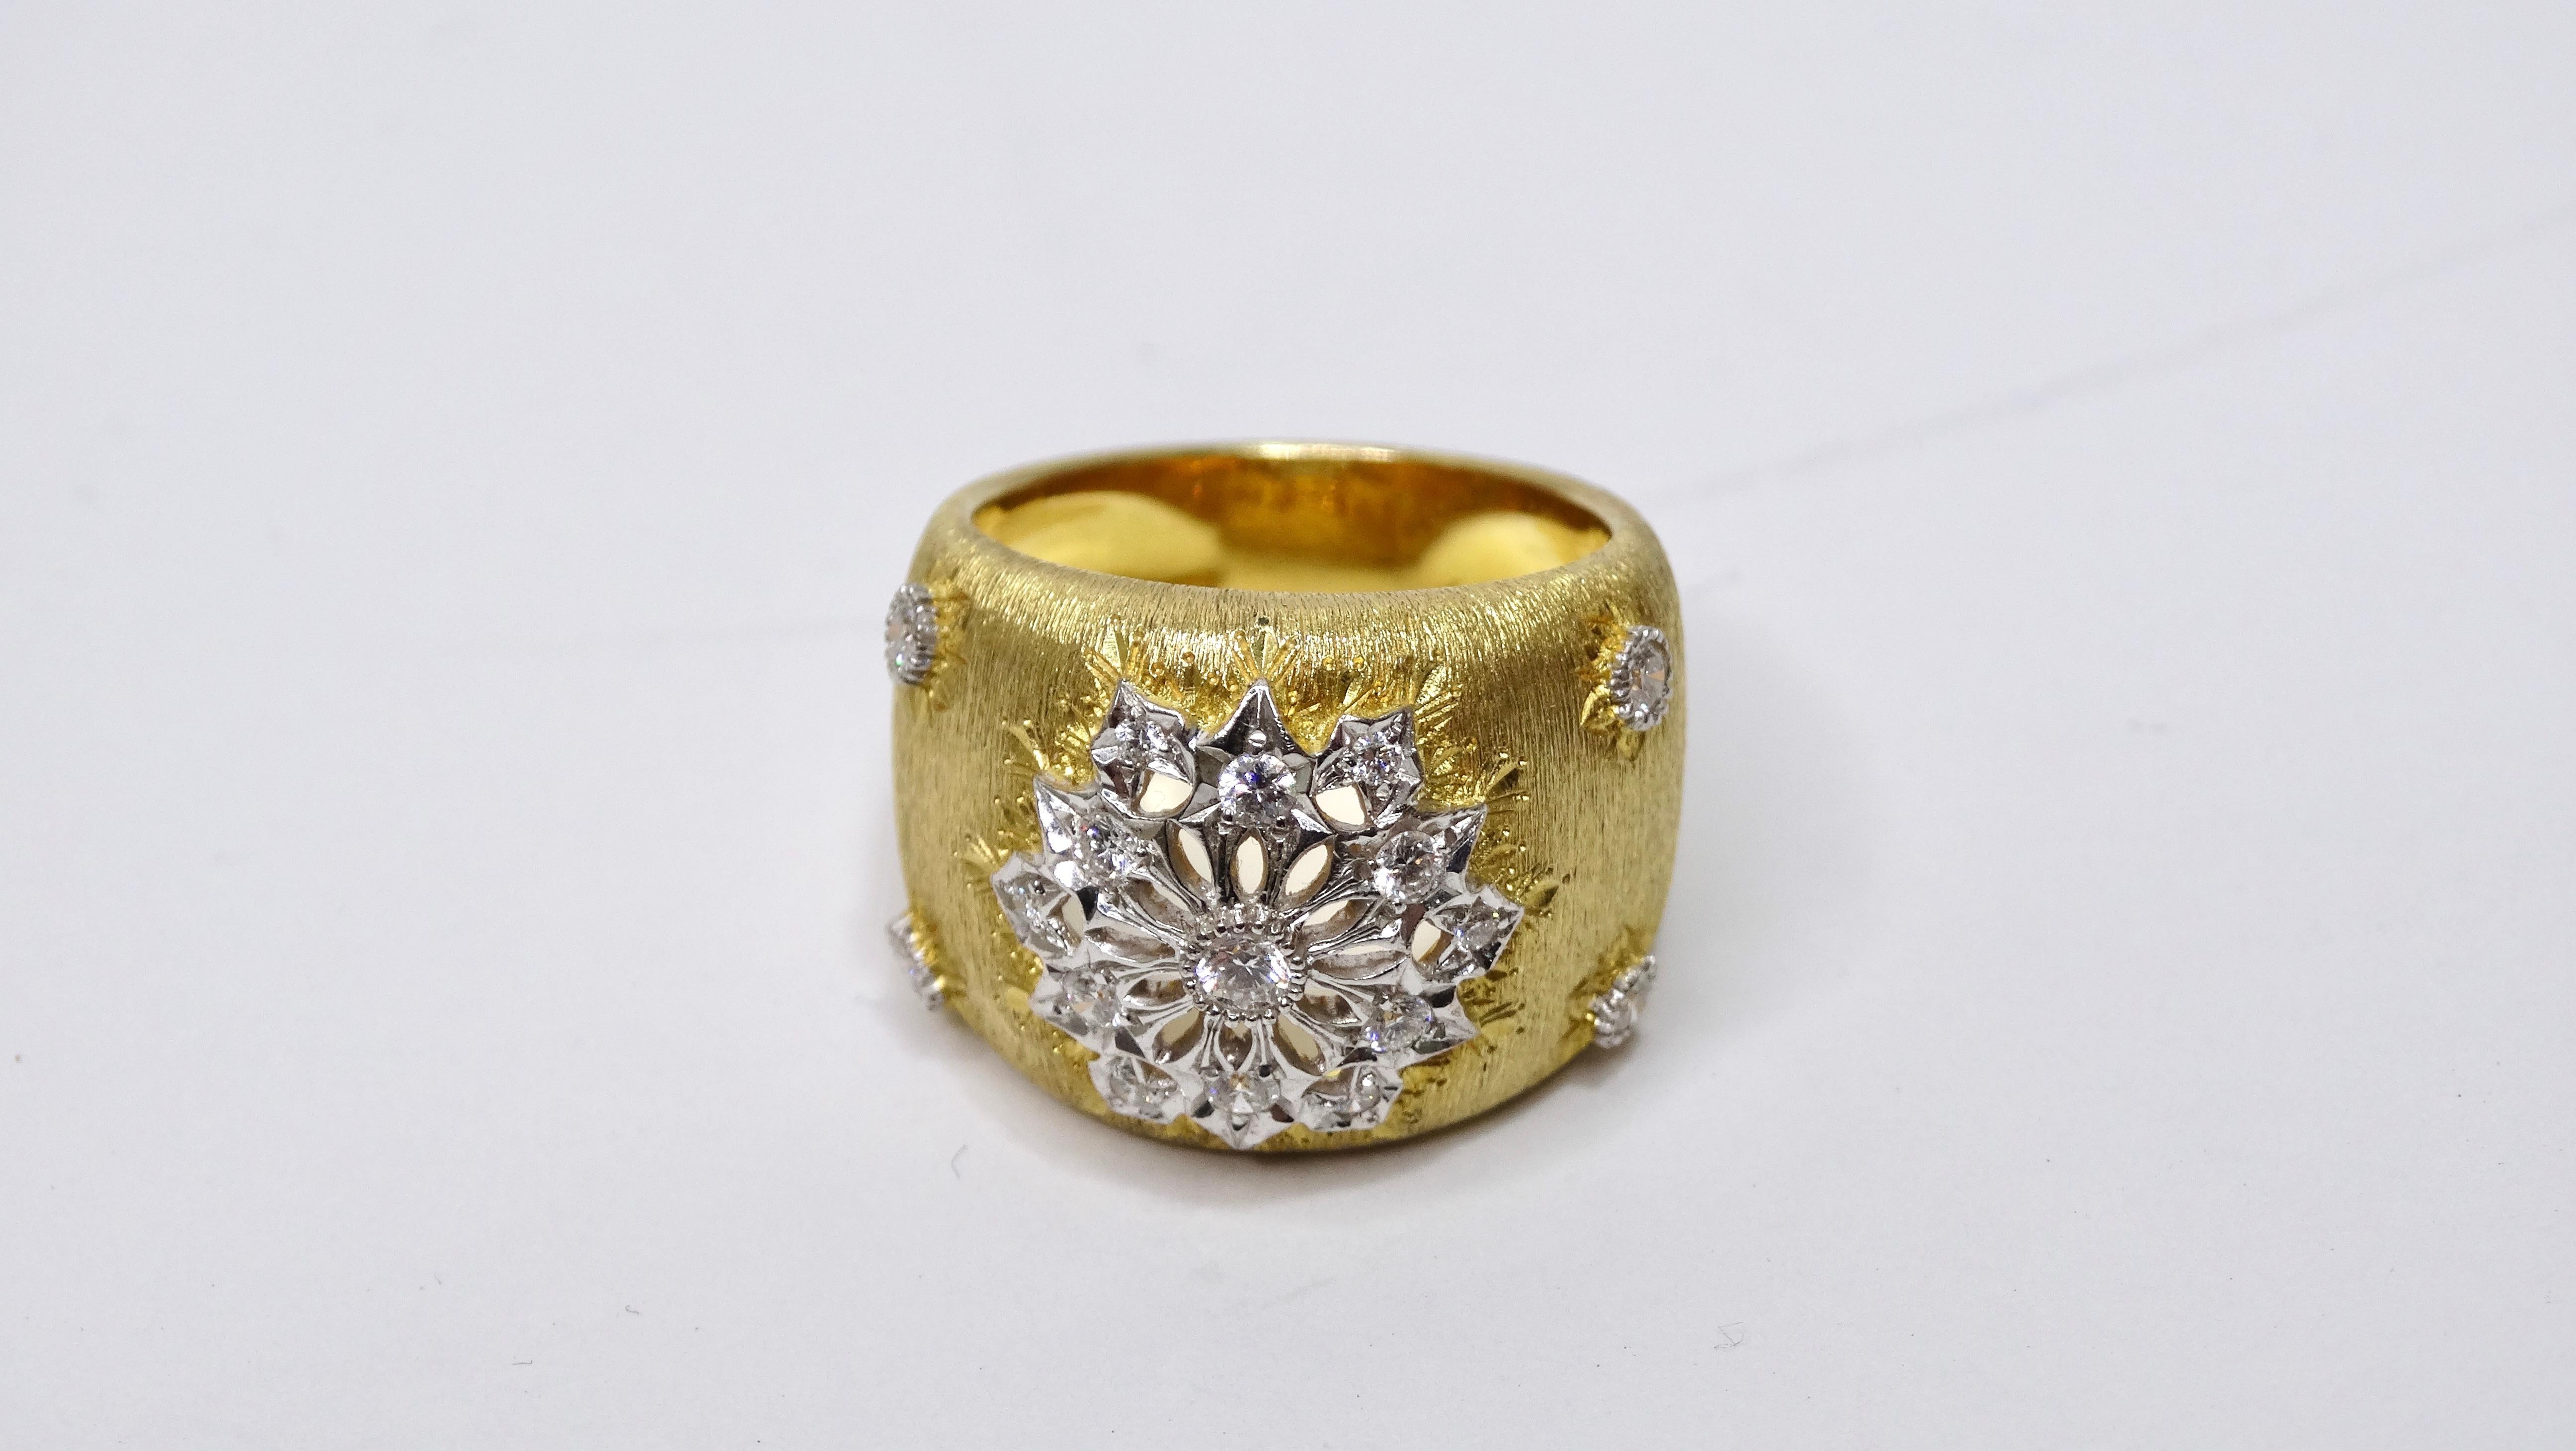 This is an exquisite ring that has a highly designed look that is made for a queen! This luxurious ring features a vibrant 18k brushed gold with intricate cutouts with diamonds resembling a flower or a snowflake. It has a chunky band silhouette that